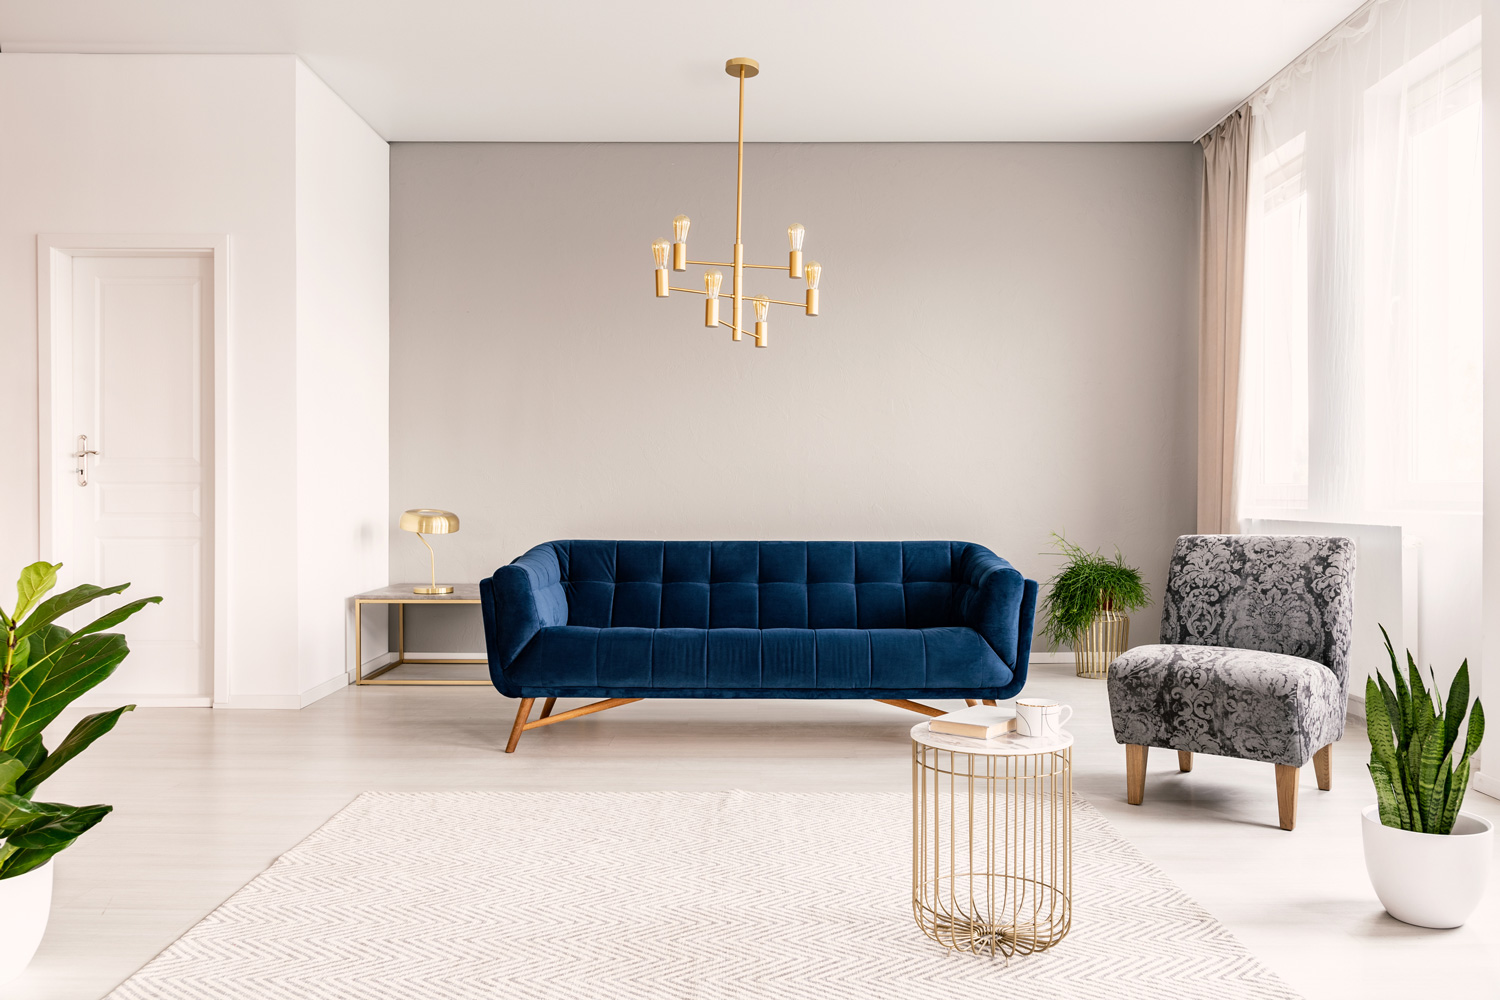 Copy space living room interior with a dark blue couch, a gray armchair and gold accents